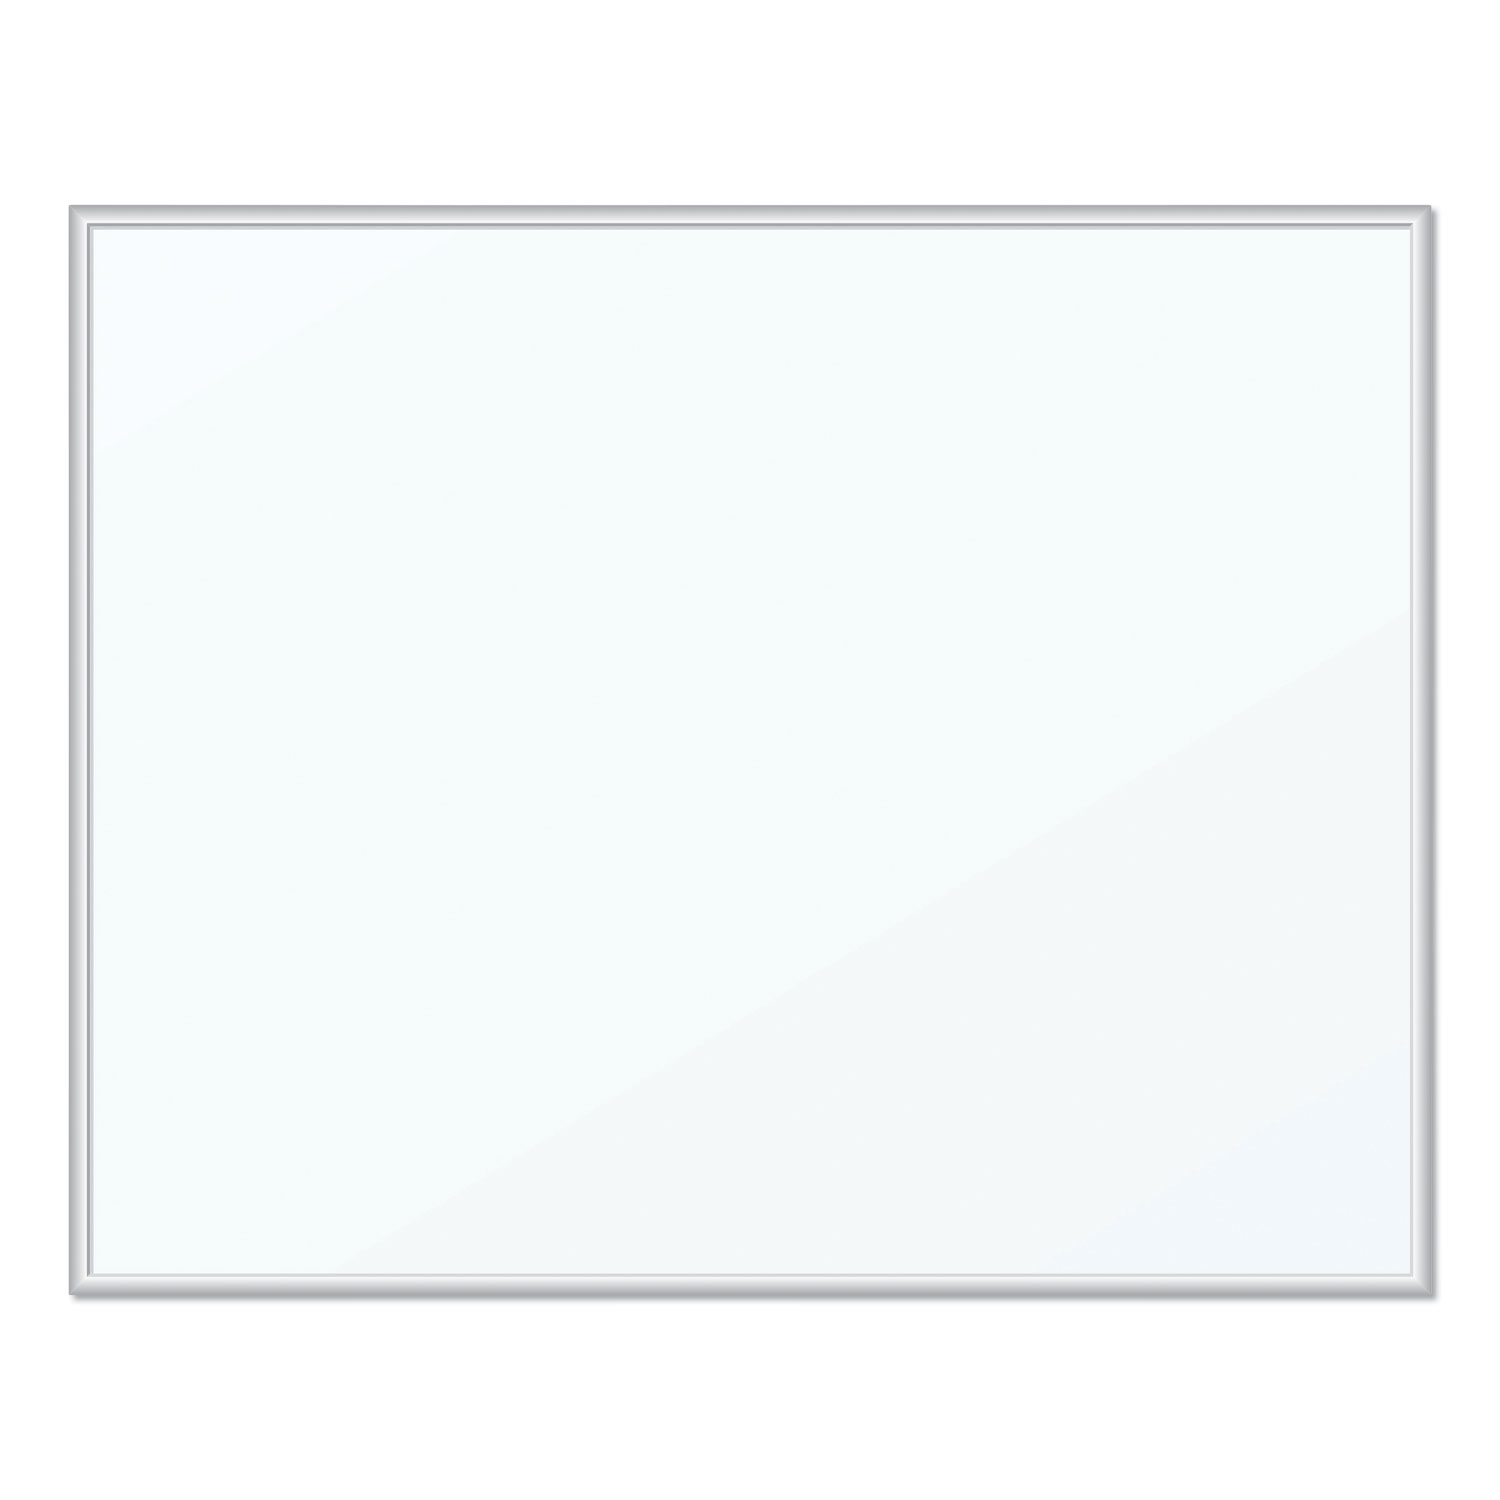 U Brands Magnetic Glass Dry Erase Board Value Pack, 72 x 36, White